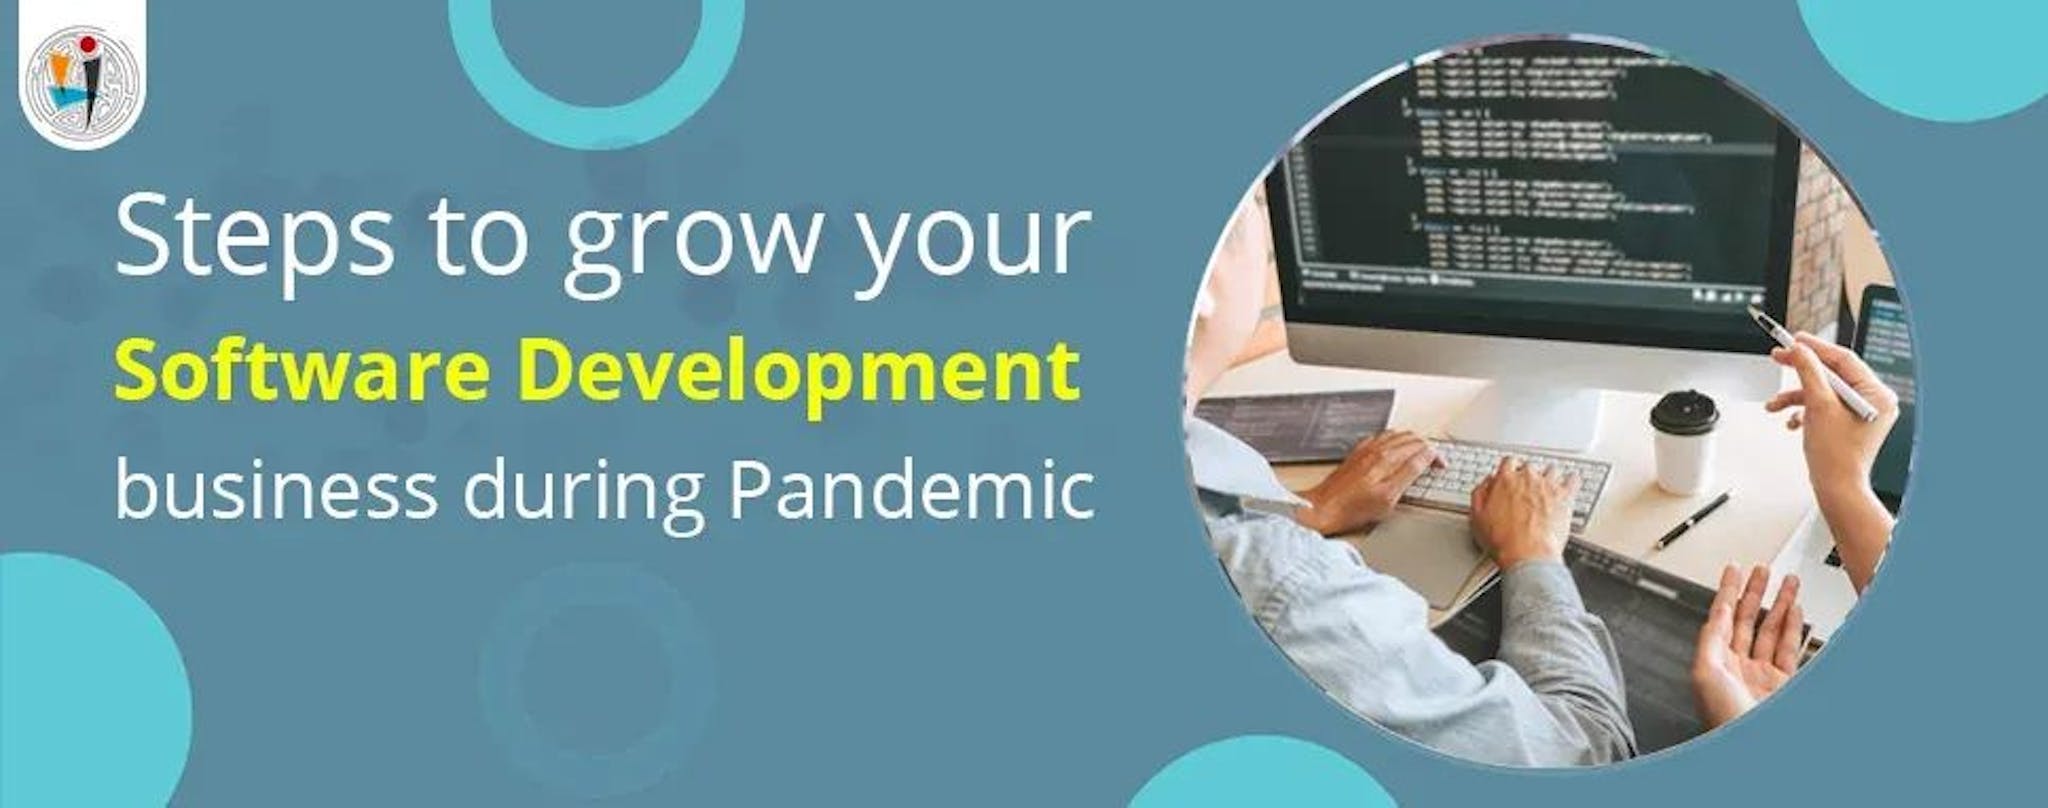 featured image - How To Reduce The Effects Of Pandemic On Your Software Development Business